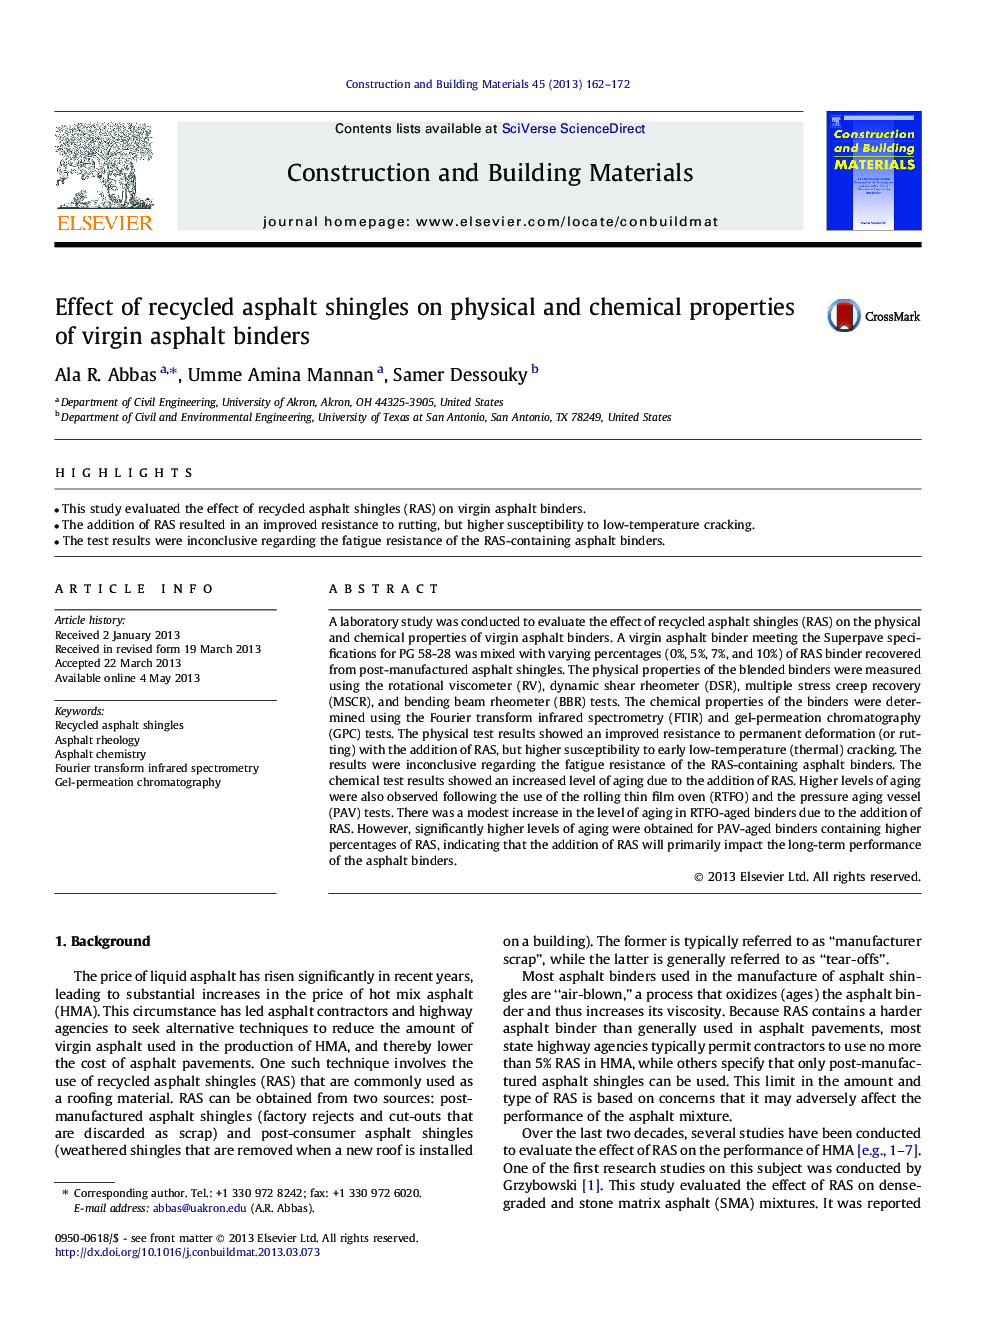 Effect of recycled asphalt shingles on physical and chemical properties of virgin asphalt binders